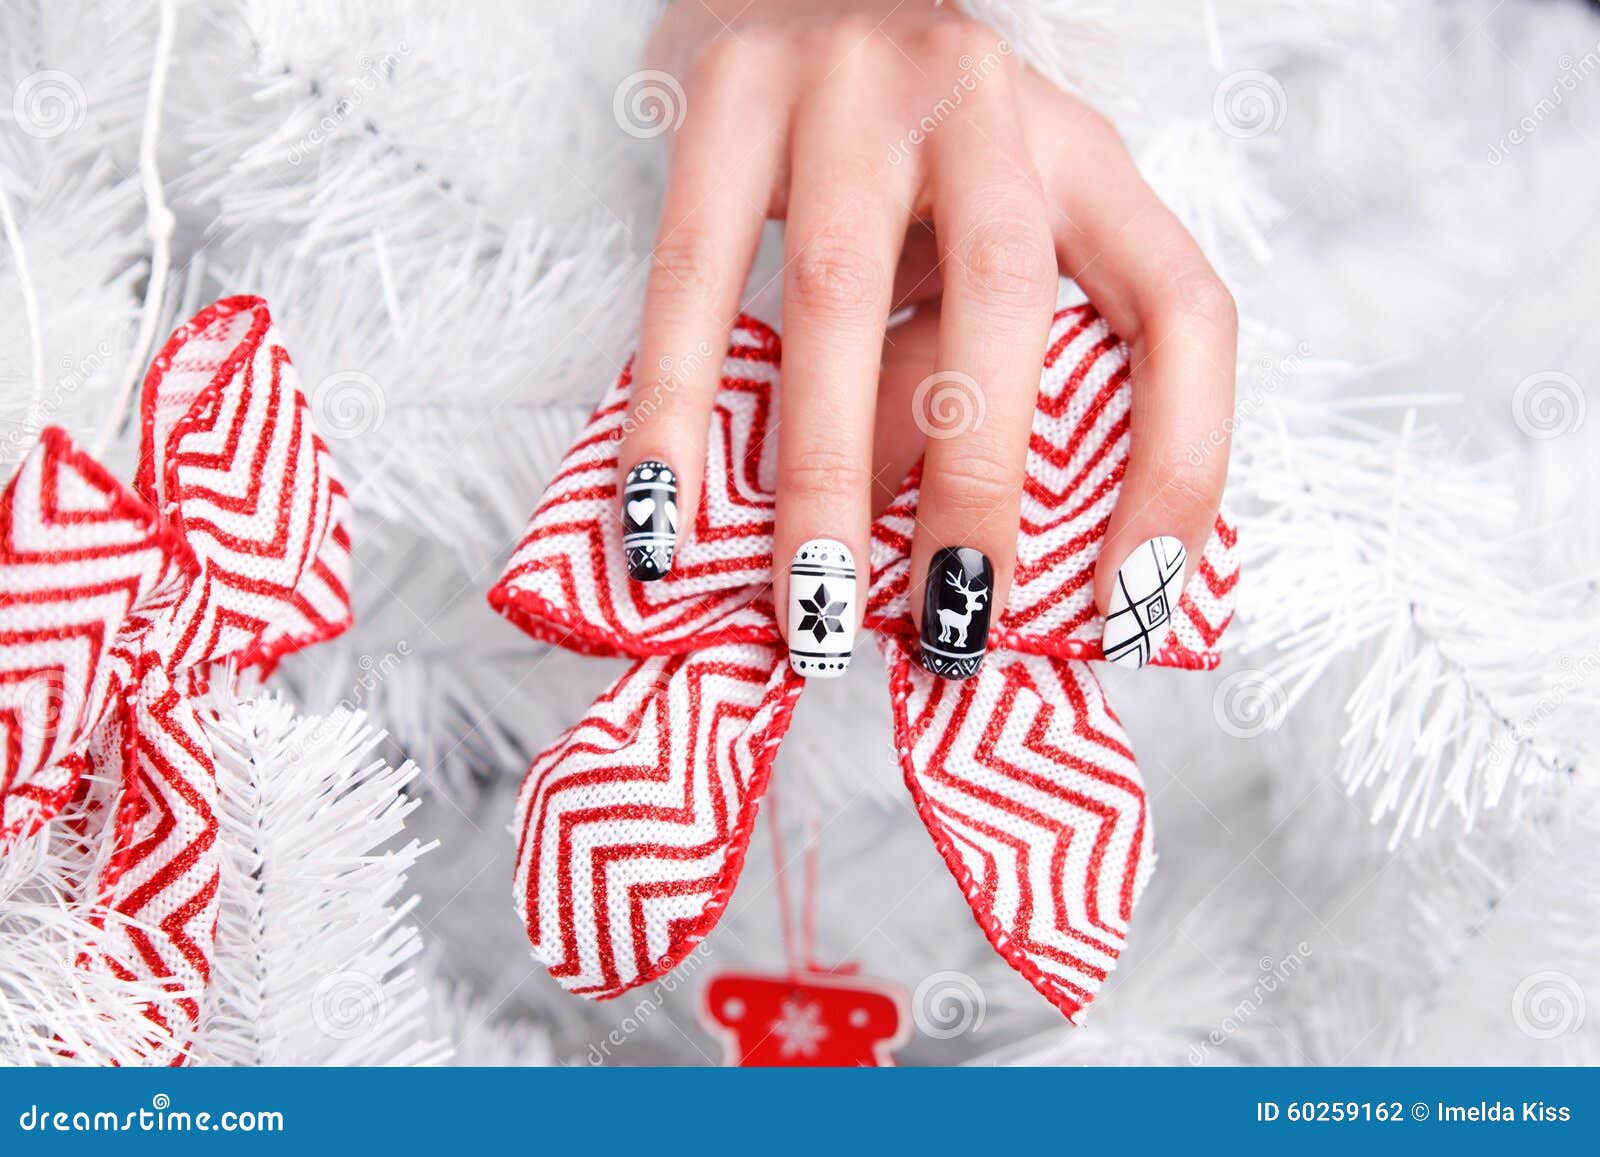 special nails for christmas